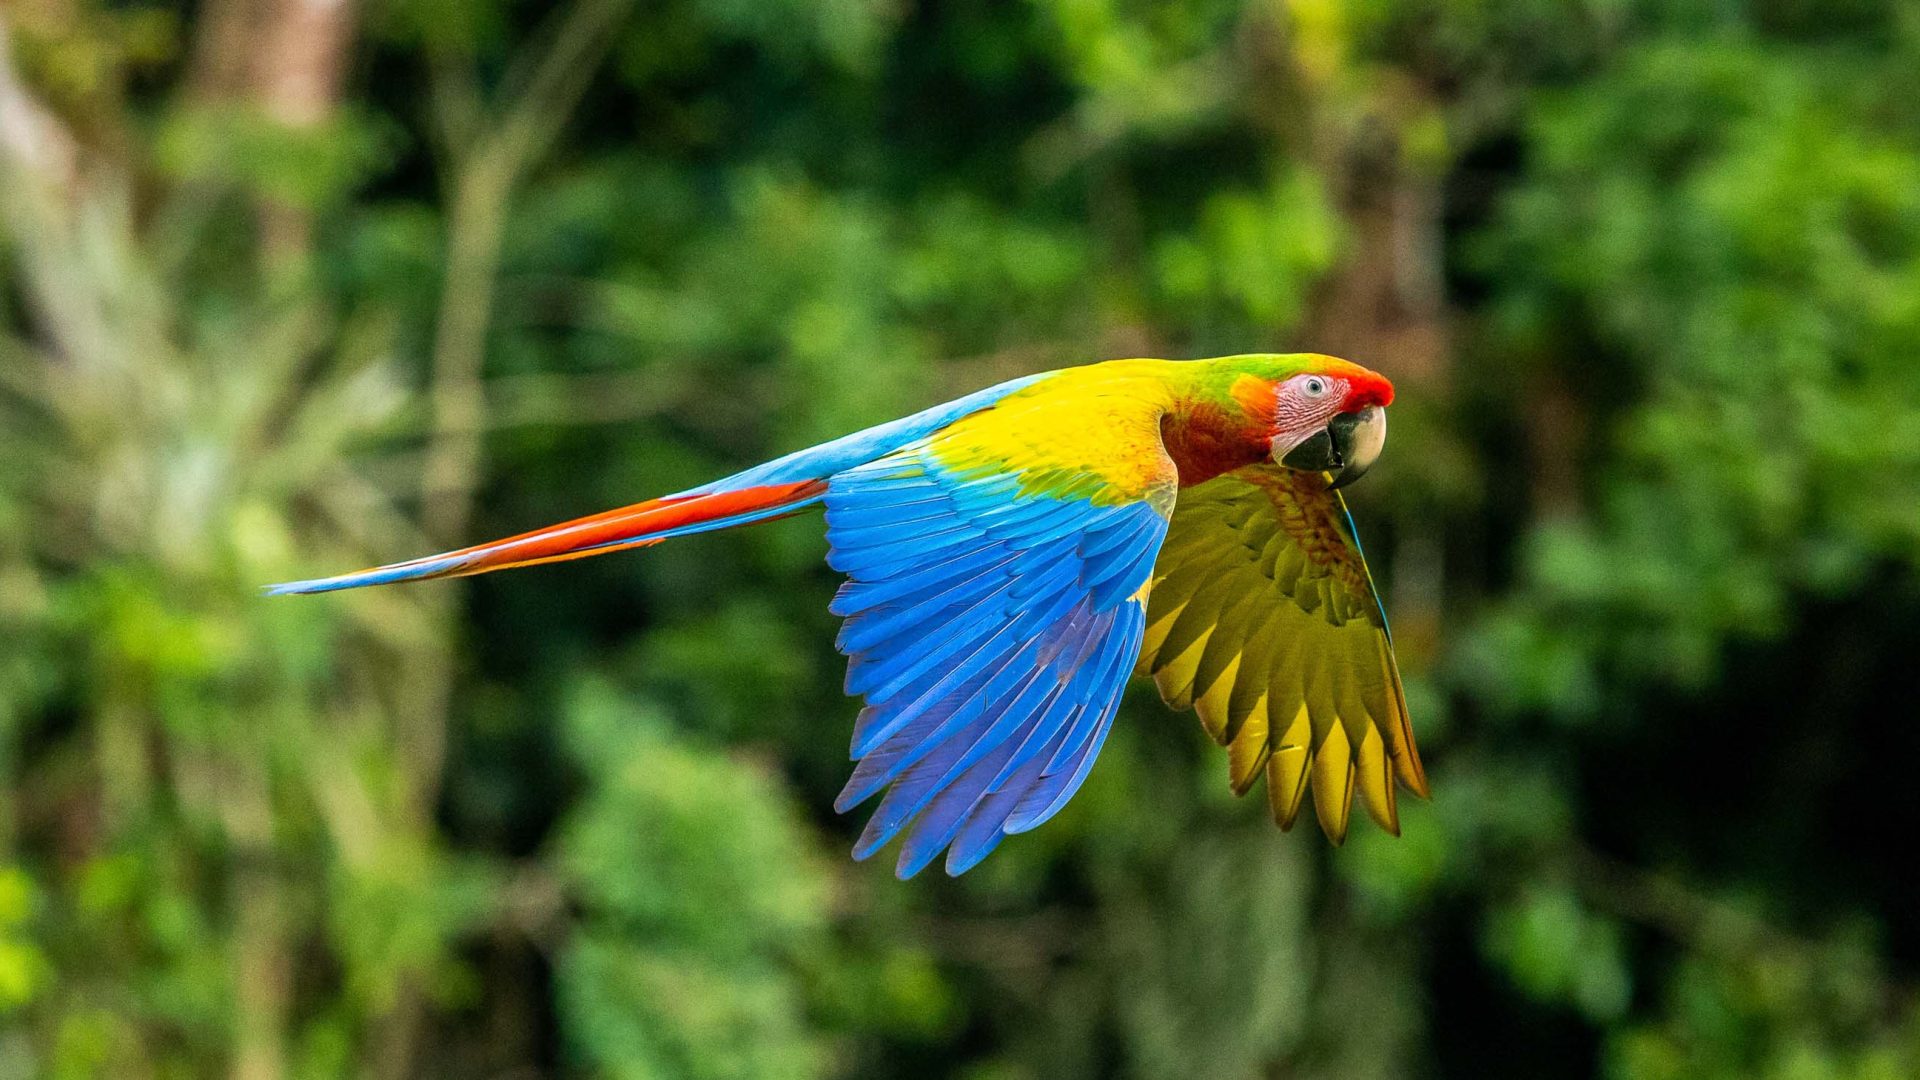 Protecting biodiversity—and making it accessible—has paid off for Costa Rica